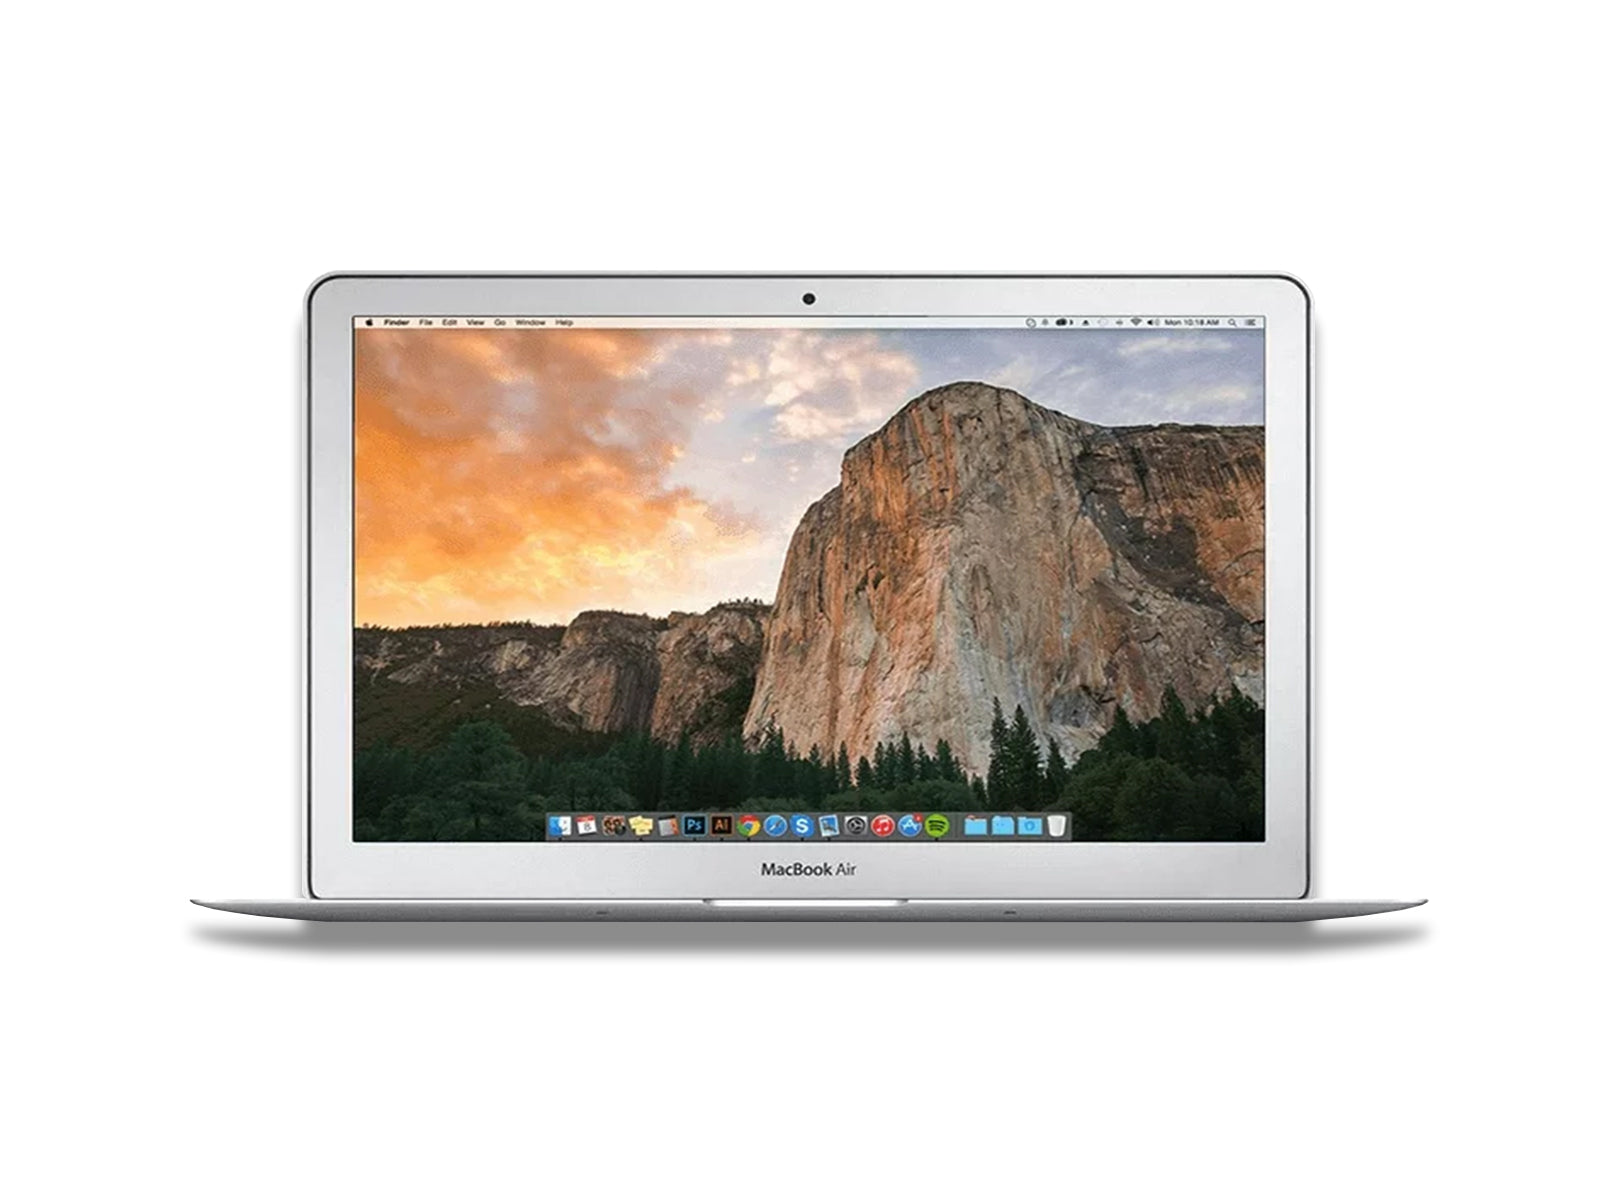 Image shows front view of macbook air opened on white background